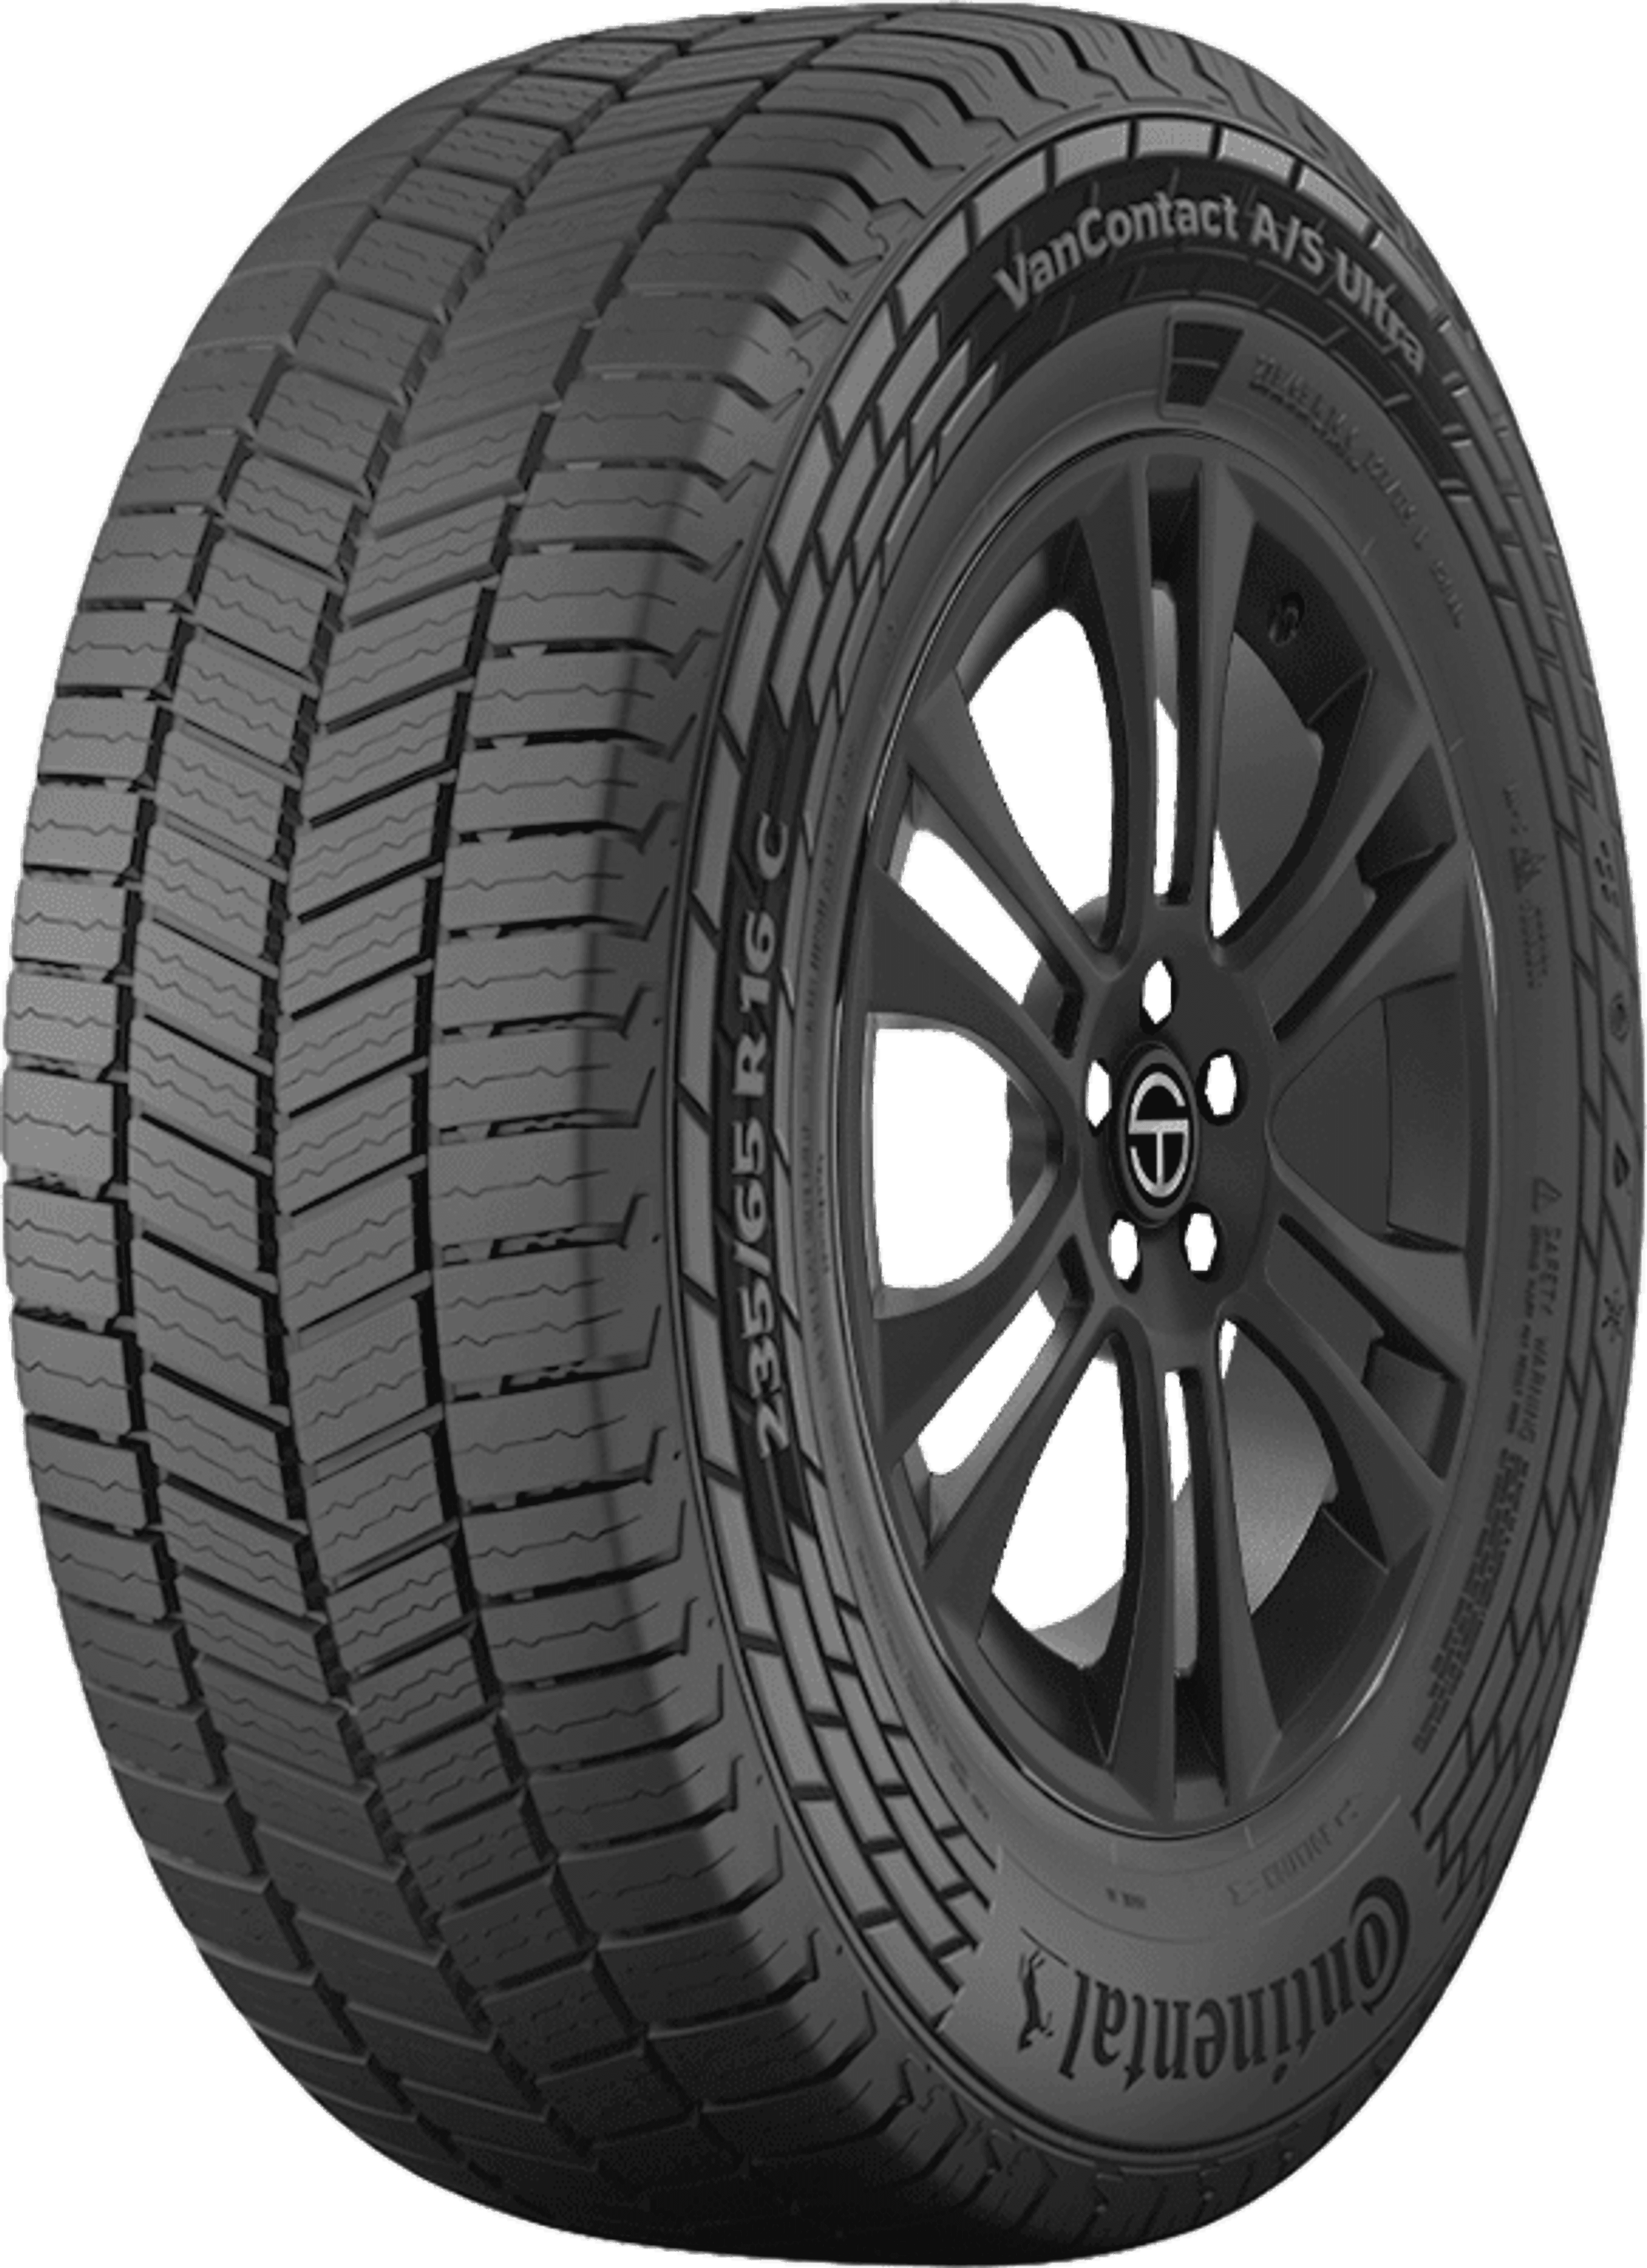 Buy Continental Vancontact A/S SimpleTire | Online Tires Ultra